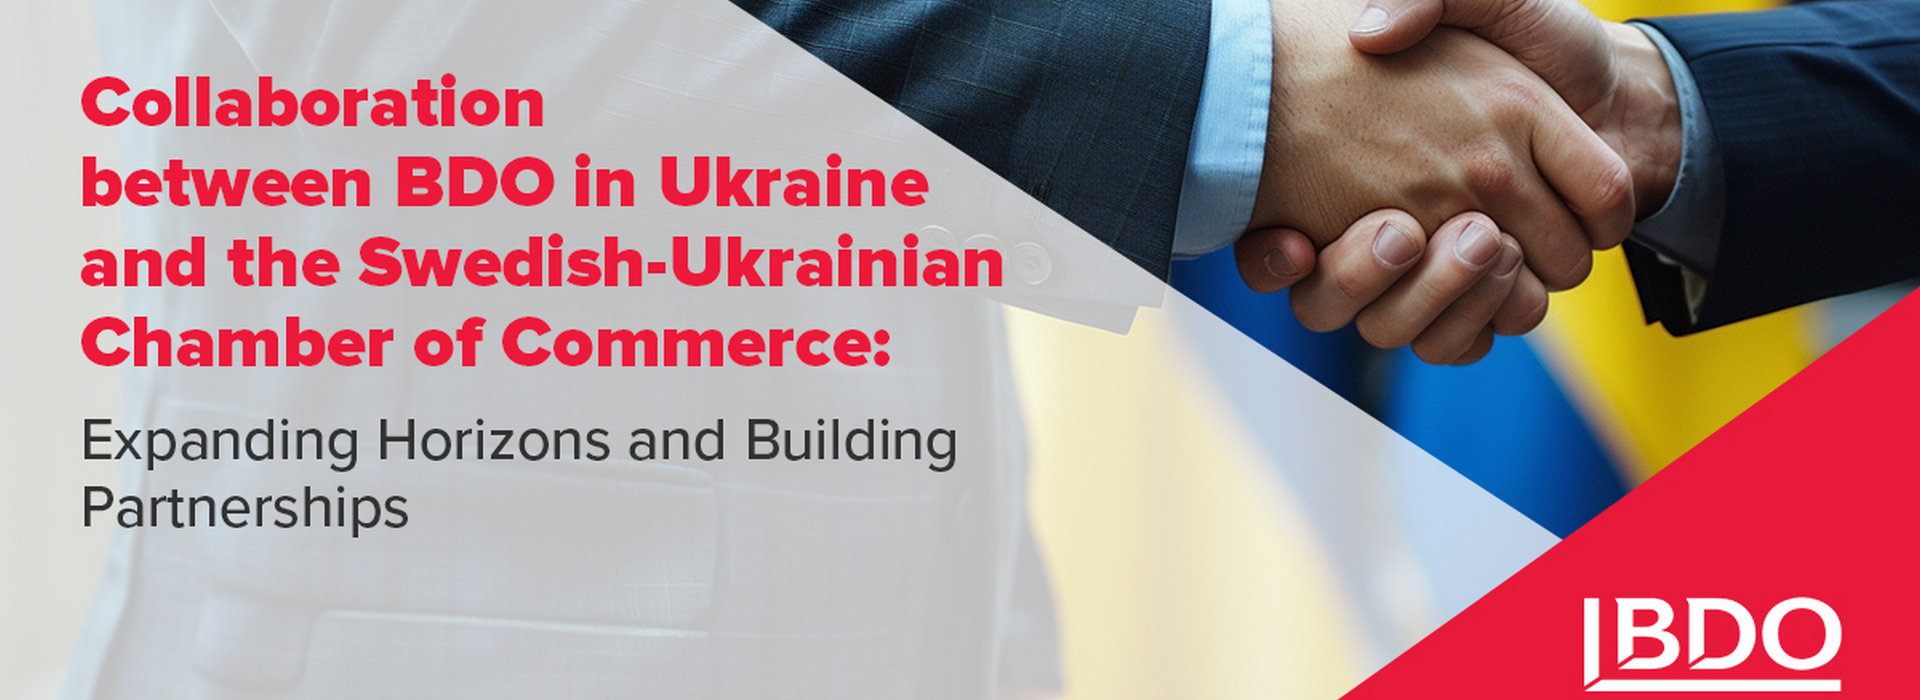 Collaboration Between BDO in Ukraine and the Swedish-Ukrainian Chamber of Commerce: Expanding Horizons and Building Partnerships